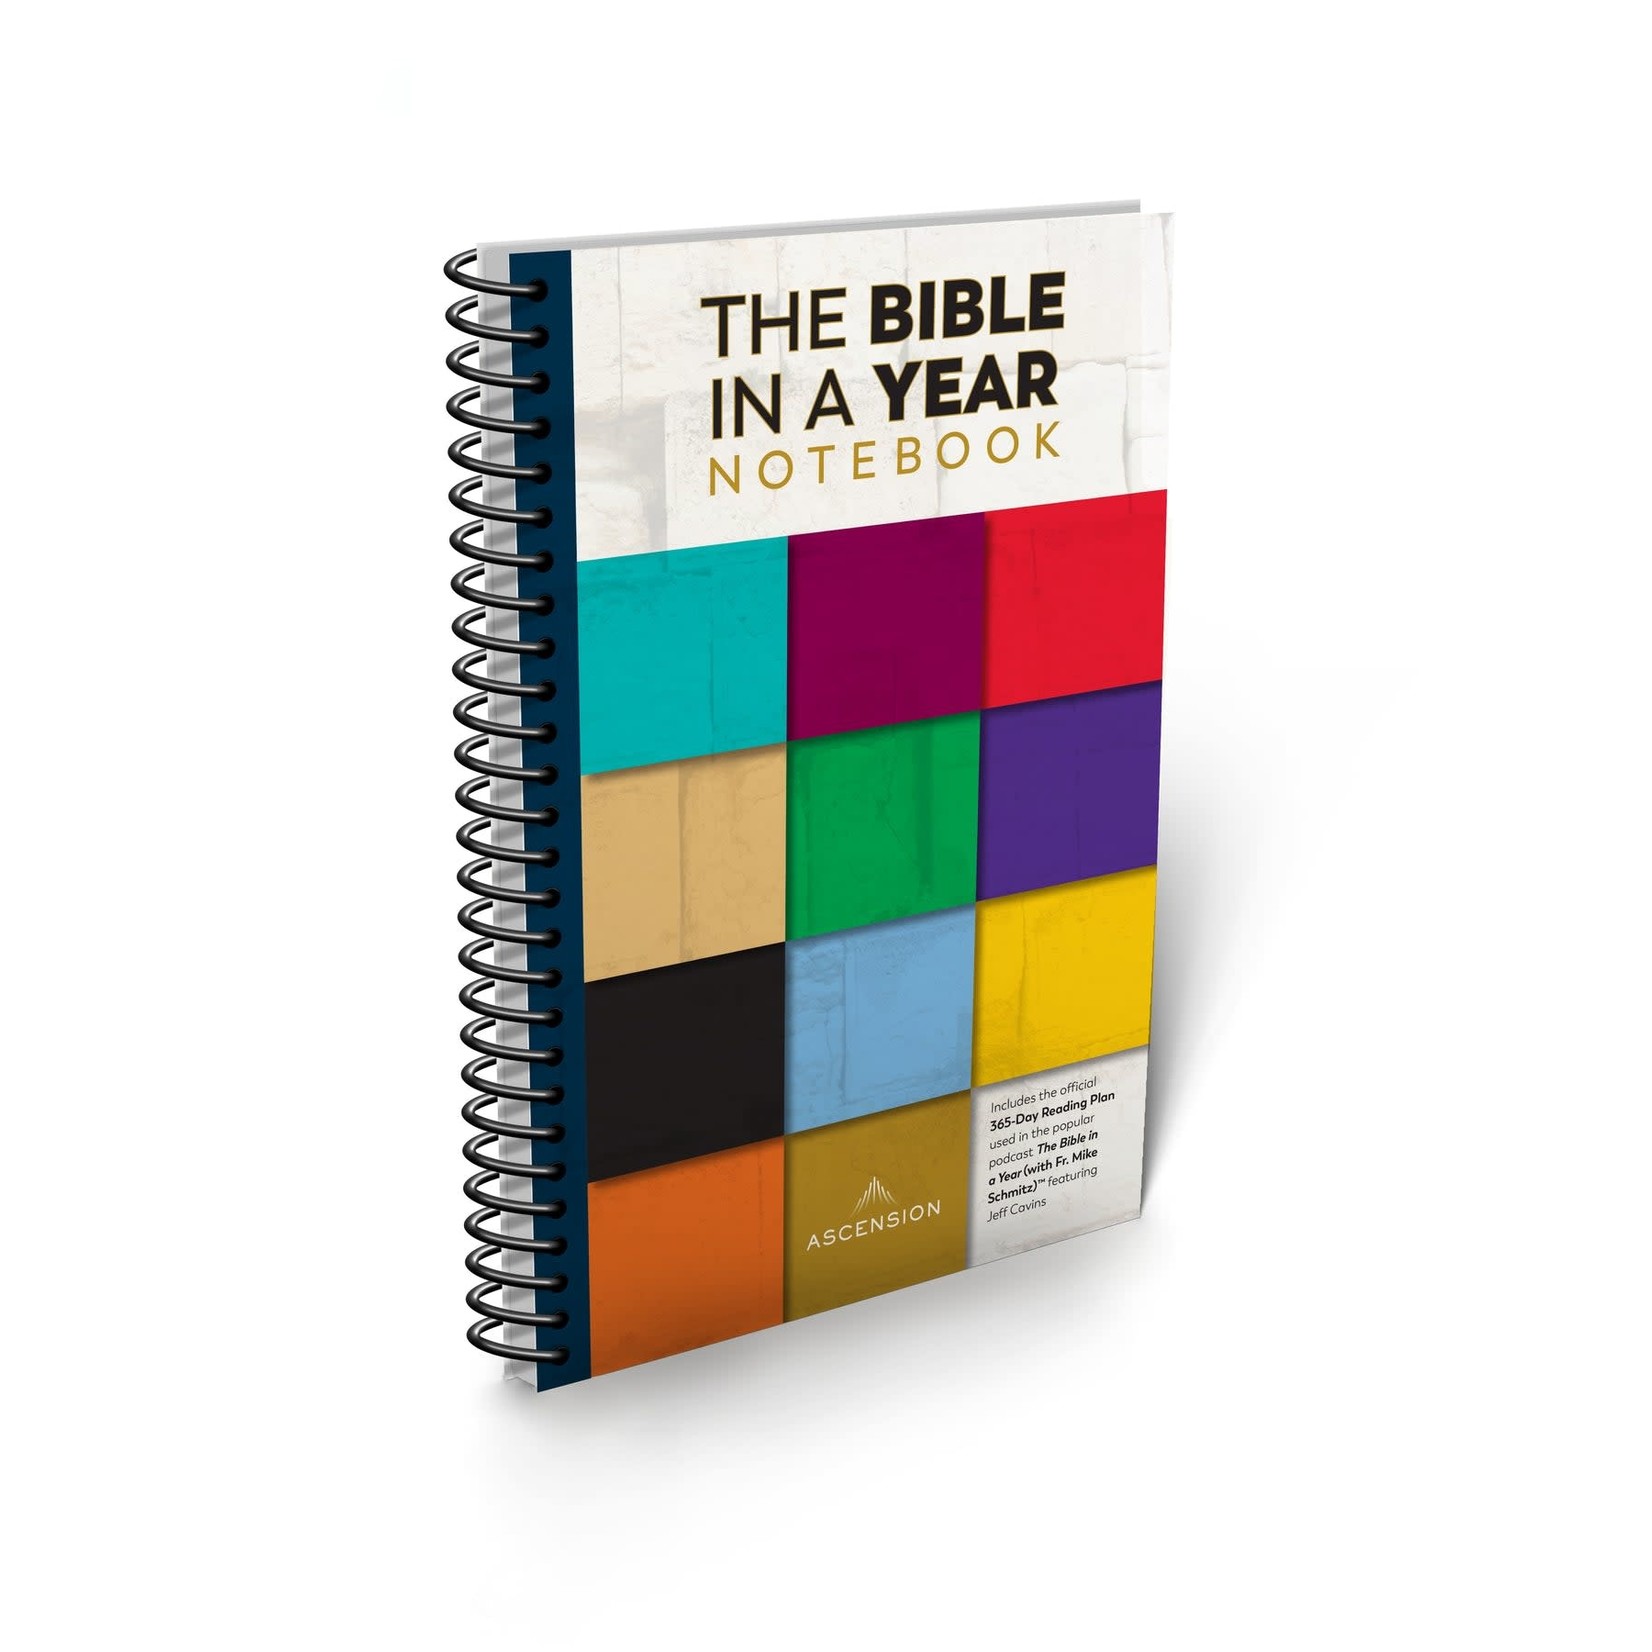 The Bible in a Year Notebook Second Edition